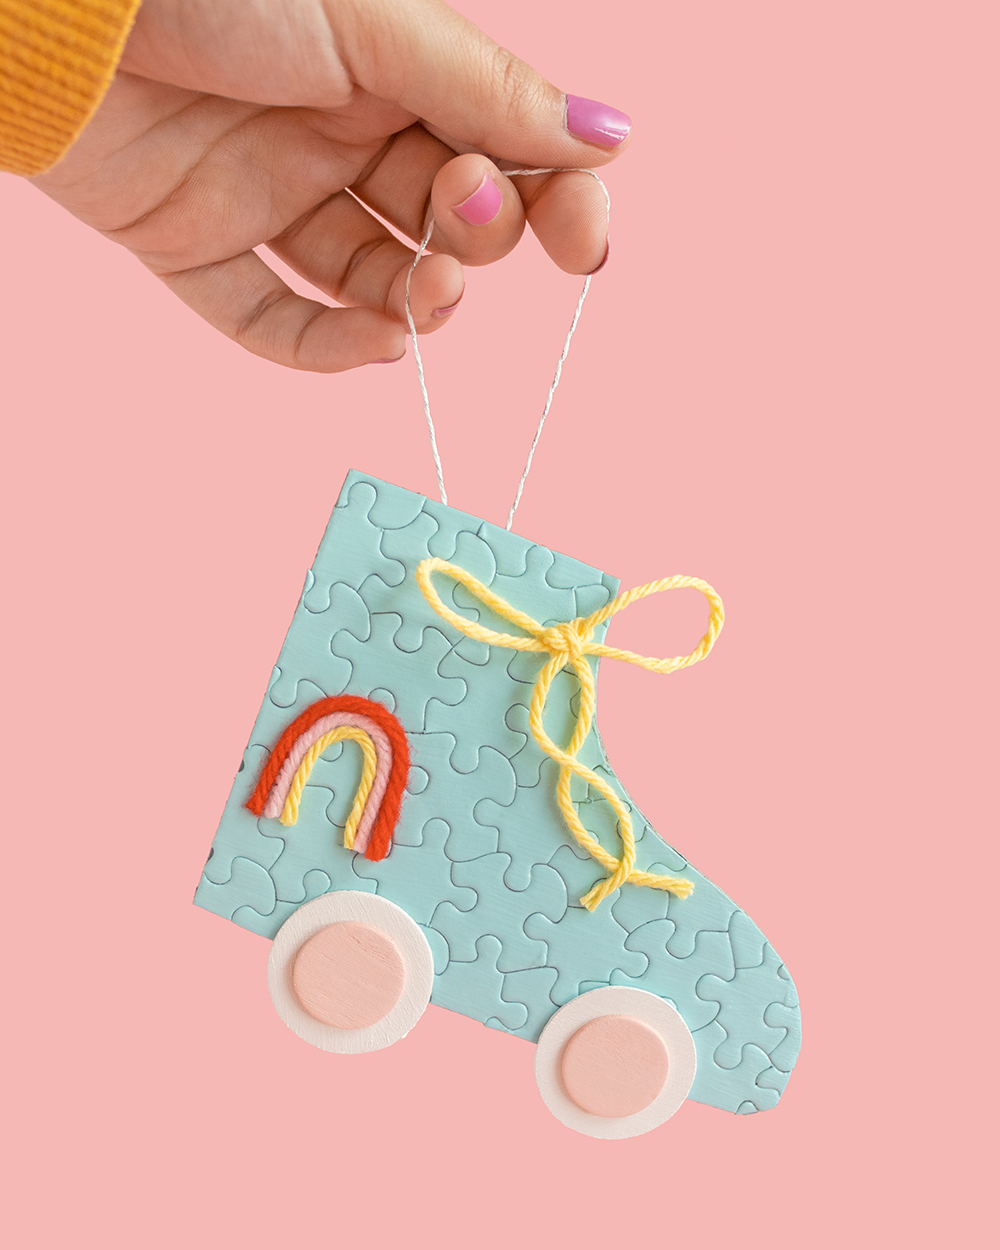 DIY Upcycled Puzzle Skate Ornament